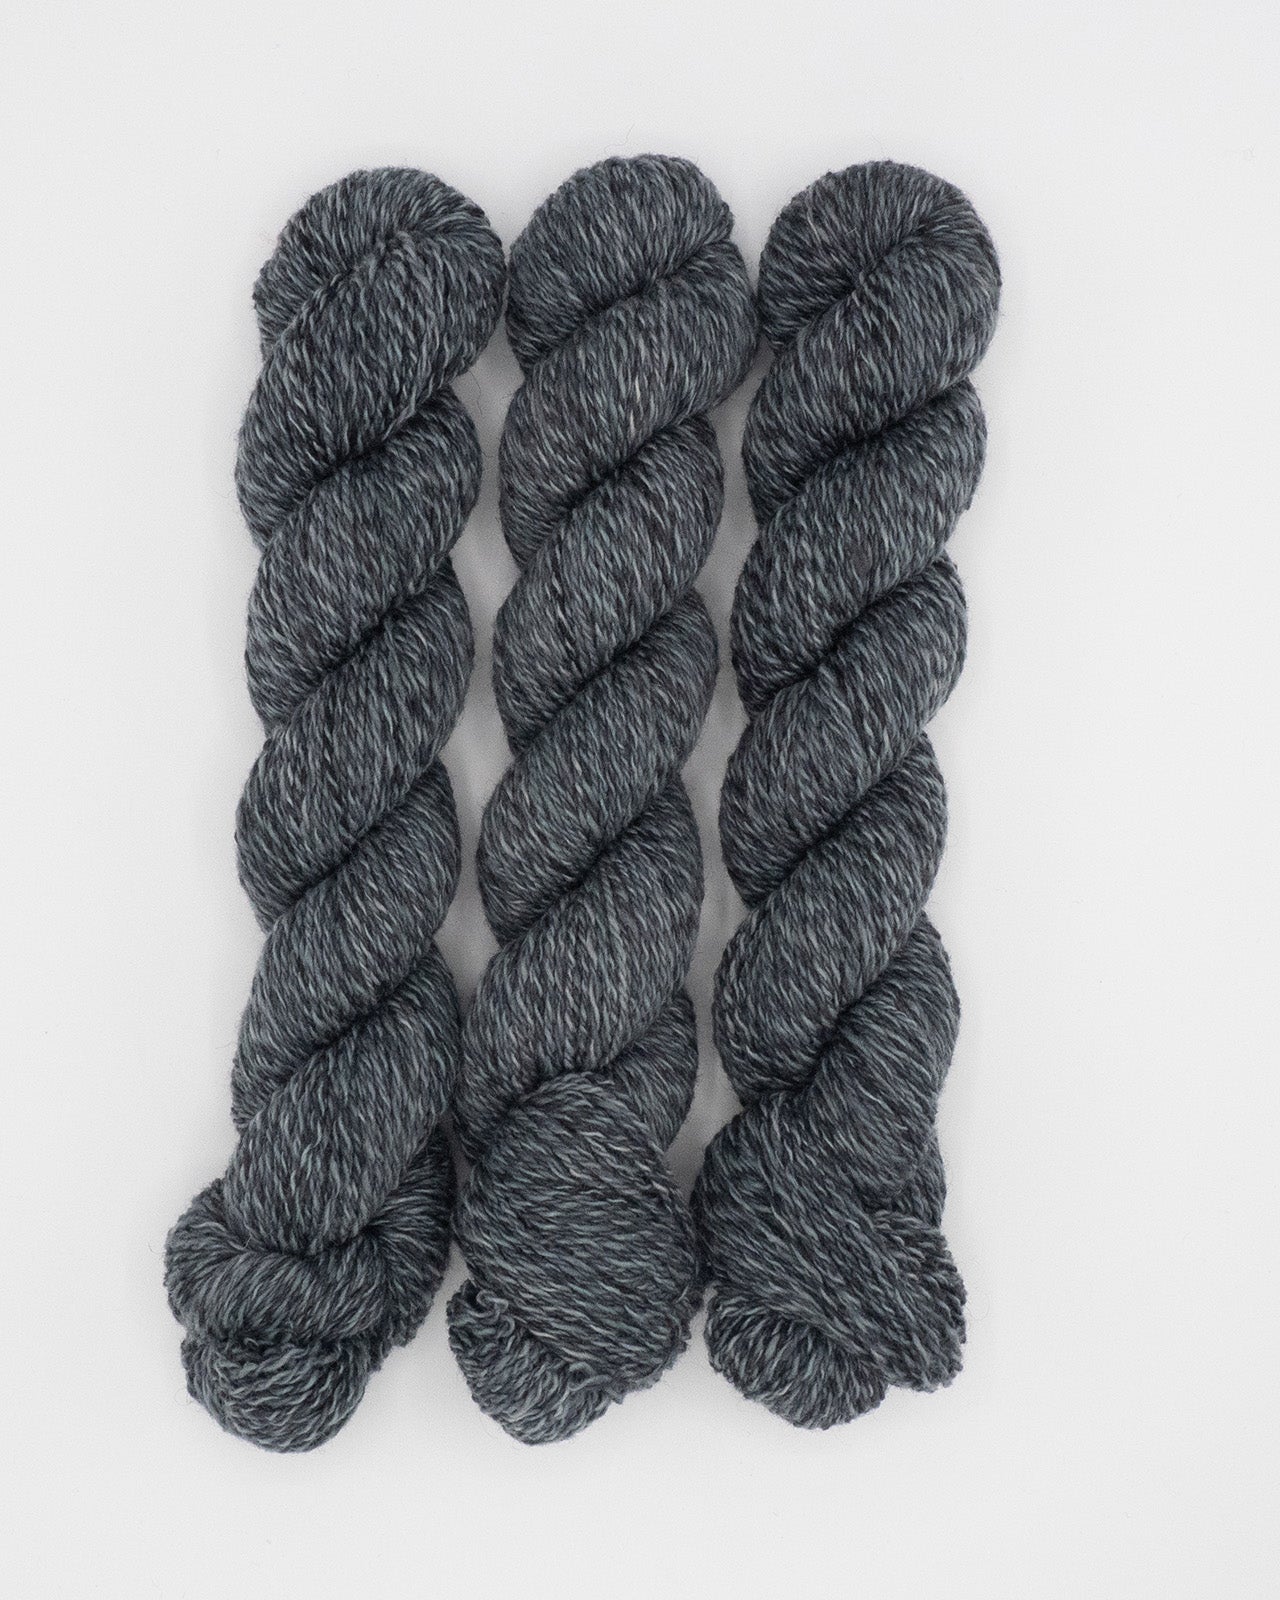 North Ave by Plied Yarns